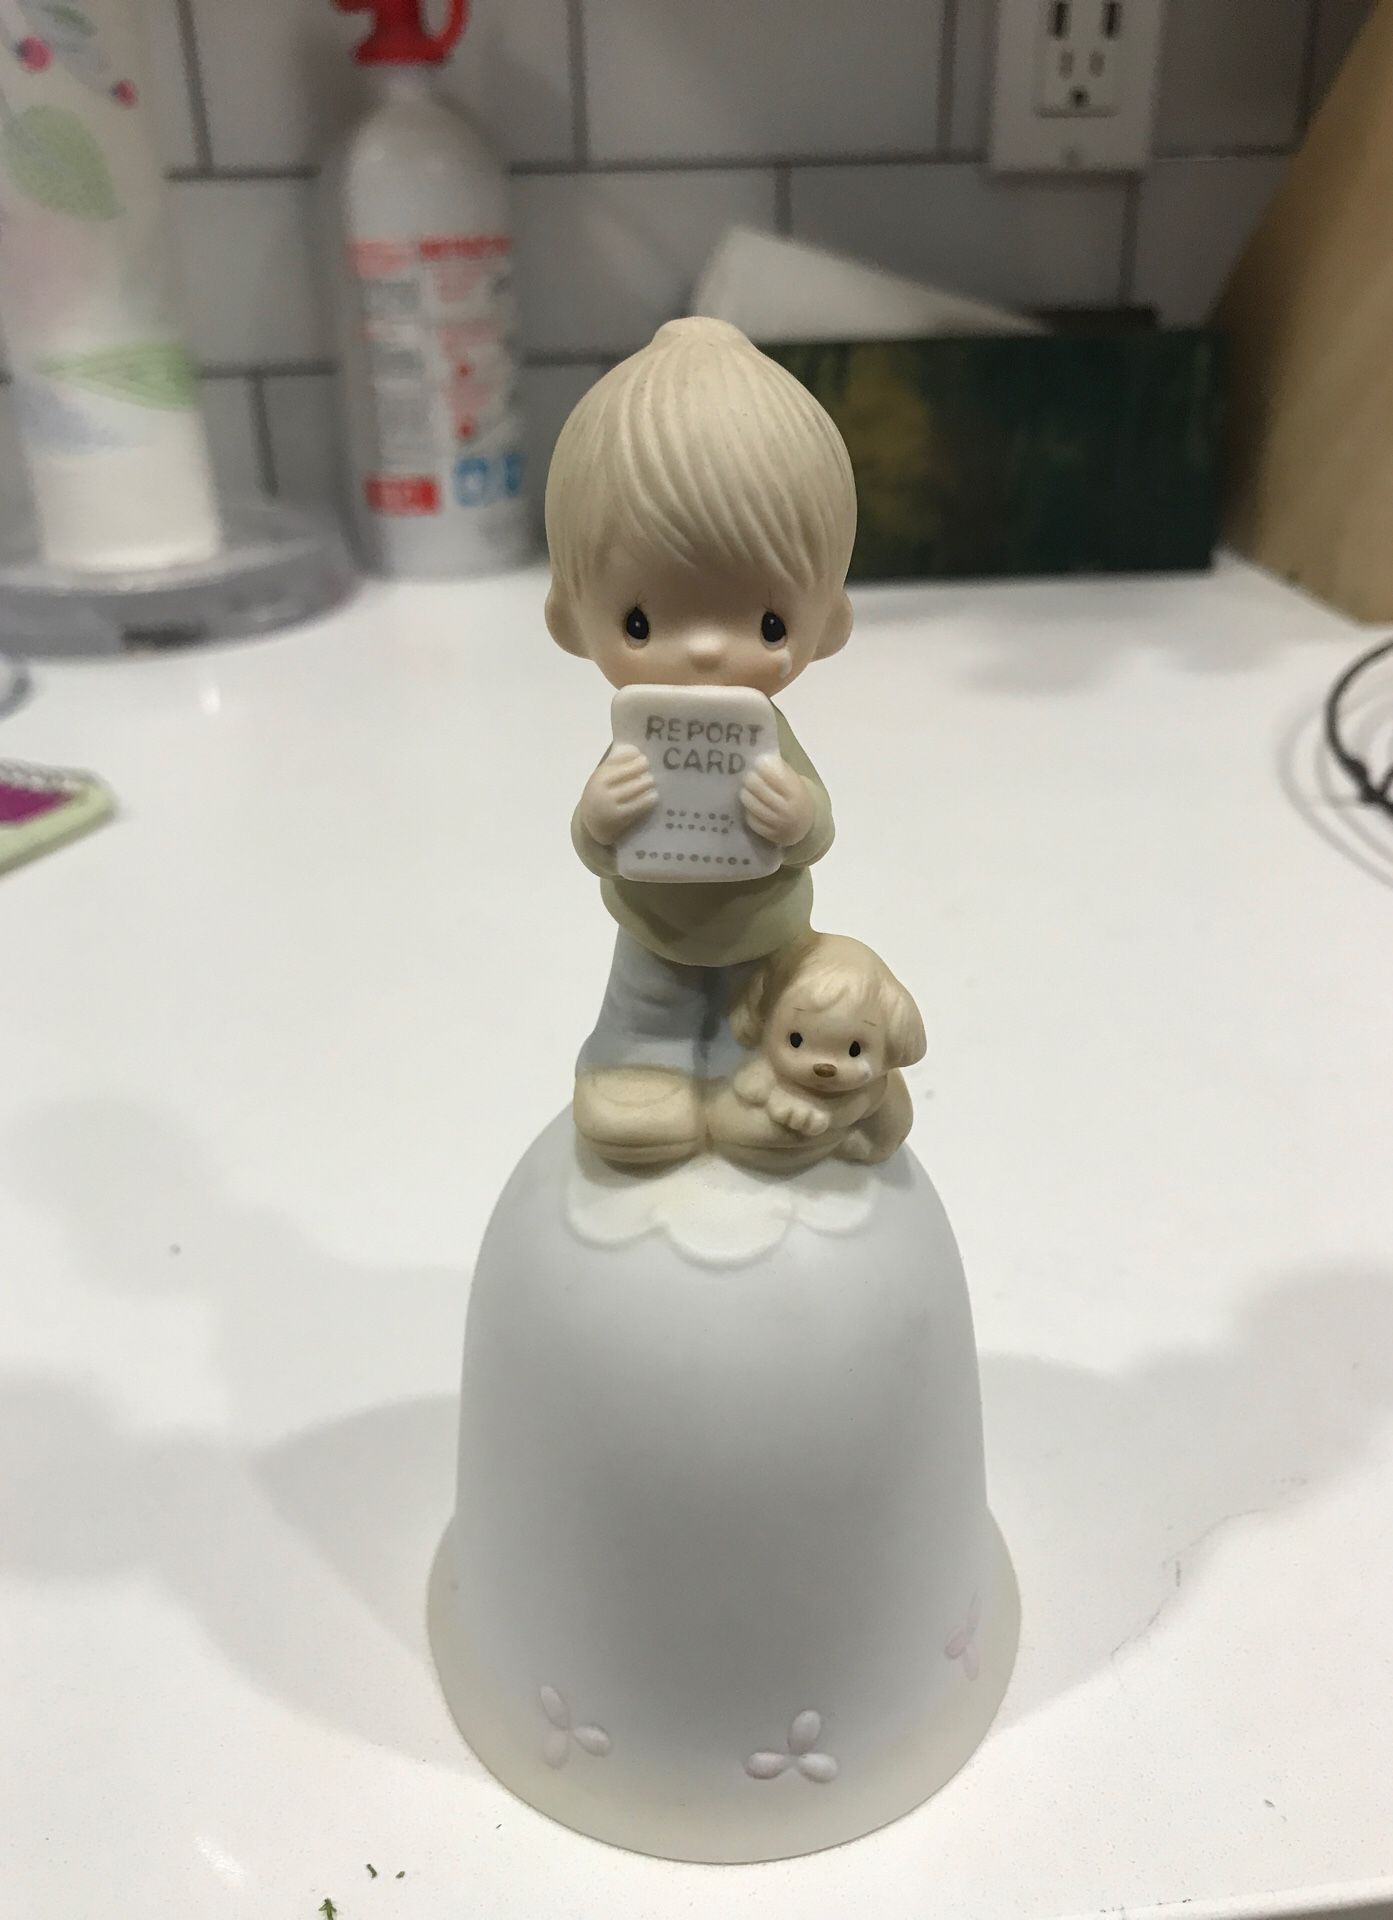 Precious Moments bell entitled “God Understands”, featuring boy with report card and dog, 5 1/2” tall, porcelain, cash only, no box